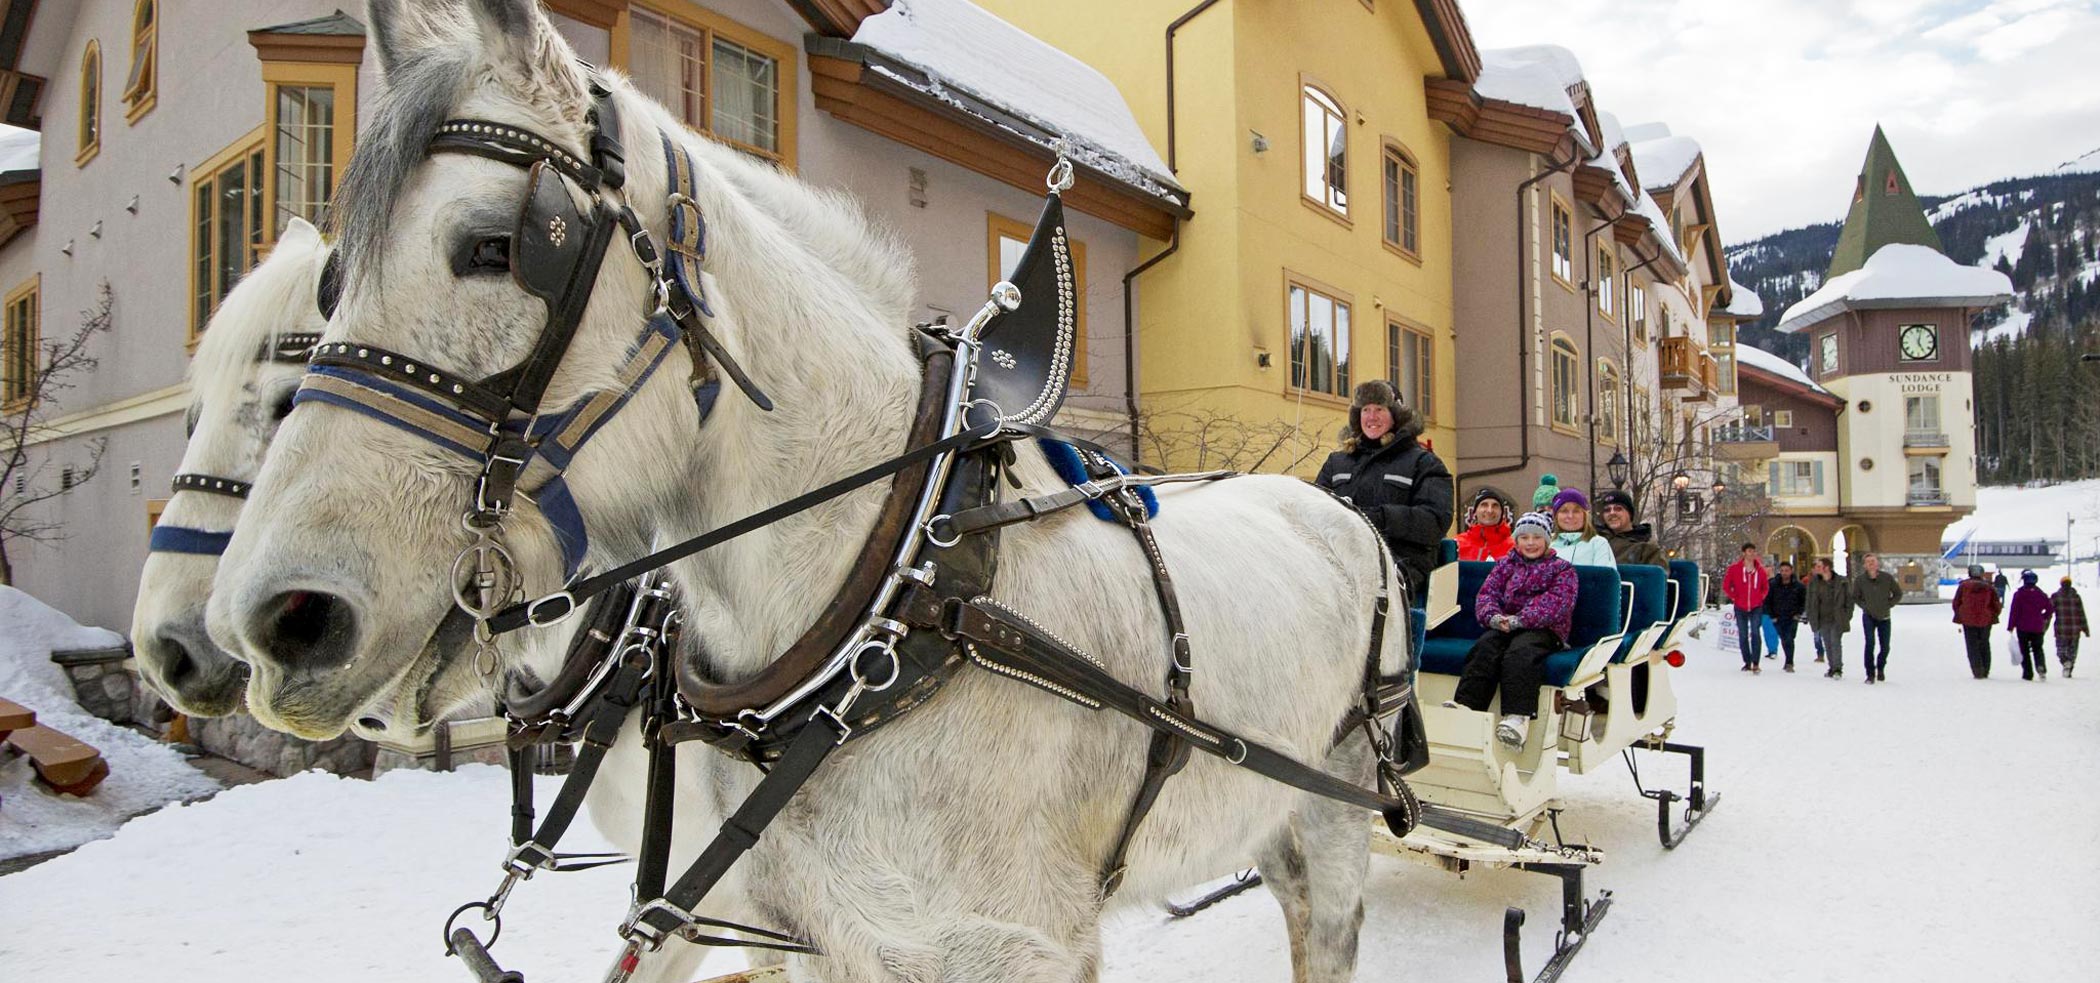 image of two horse sleigh in snow carrying people